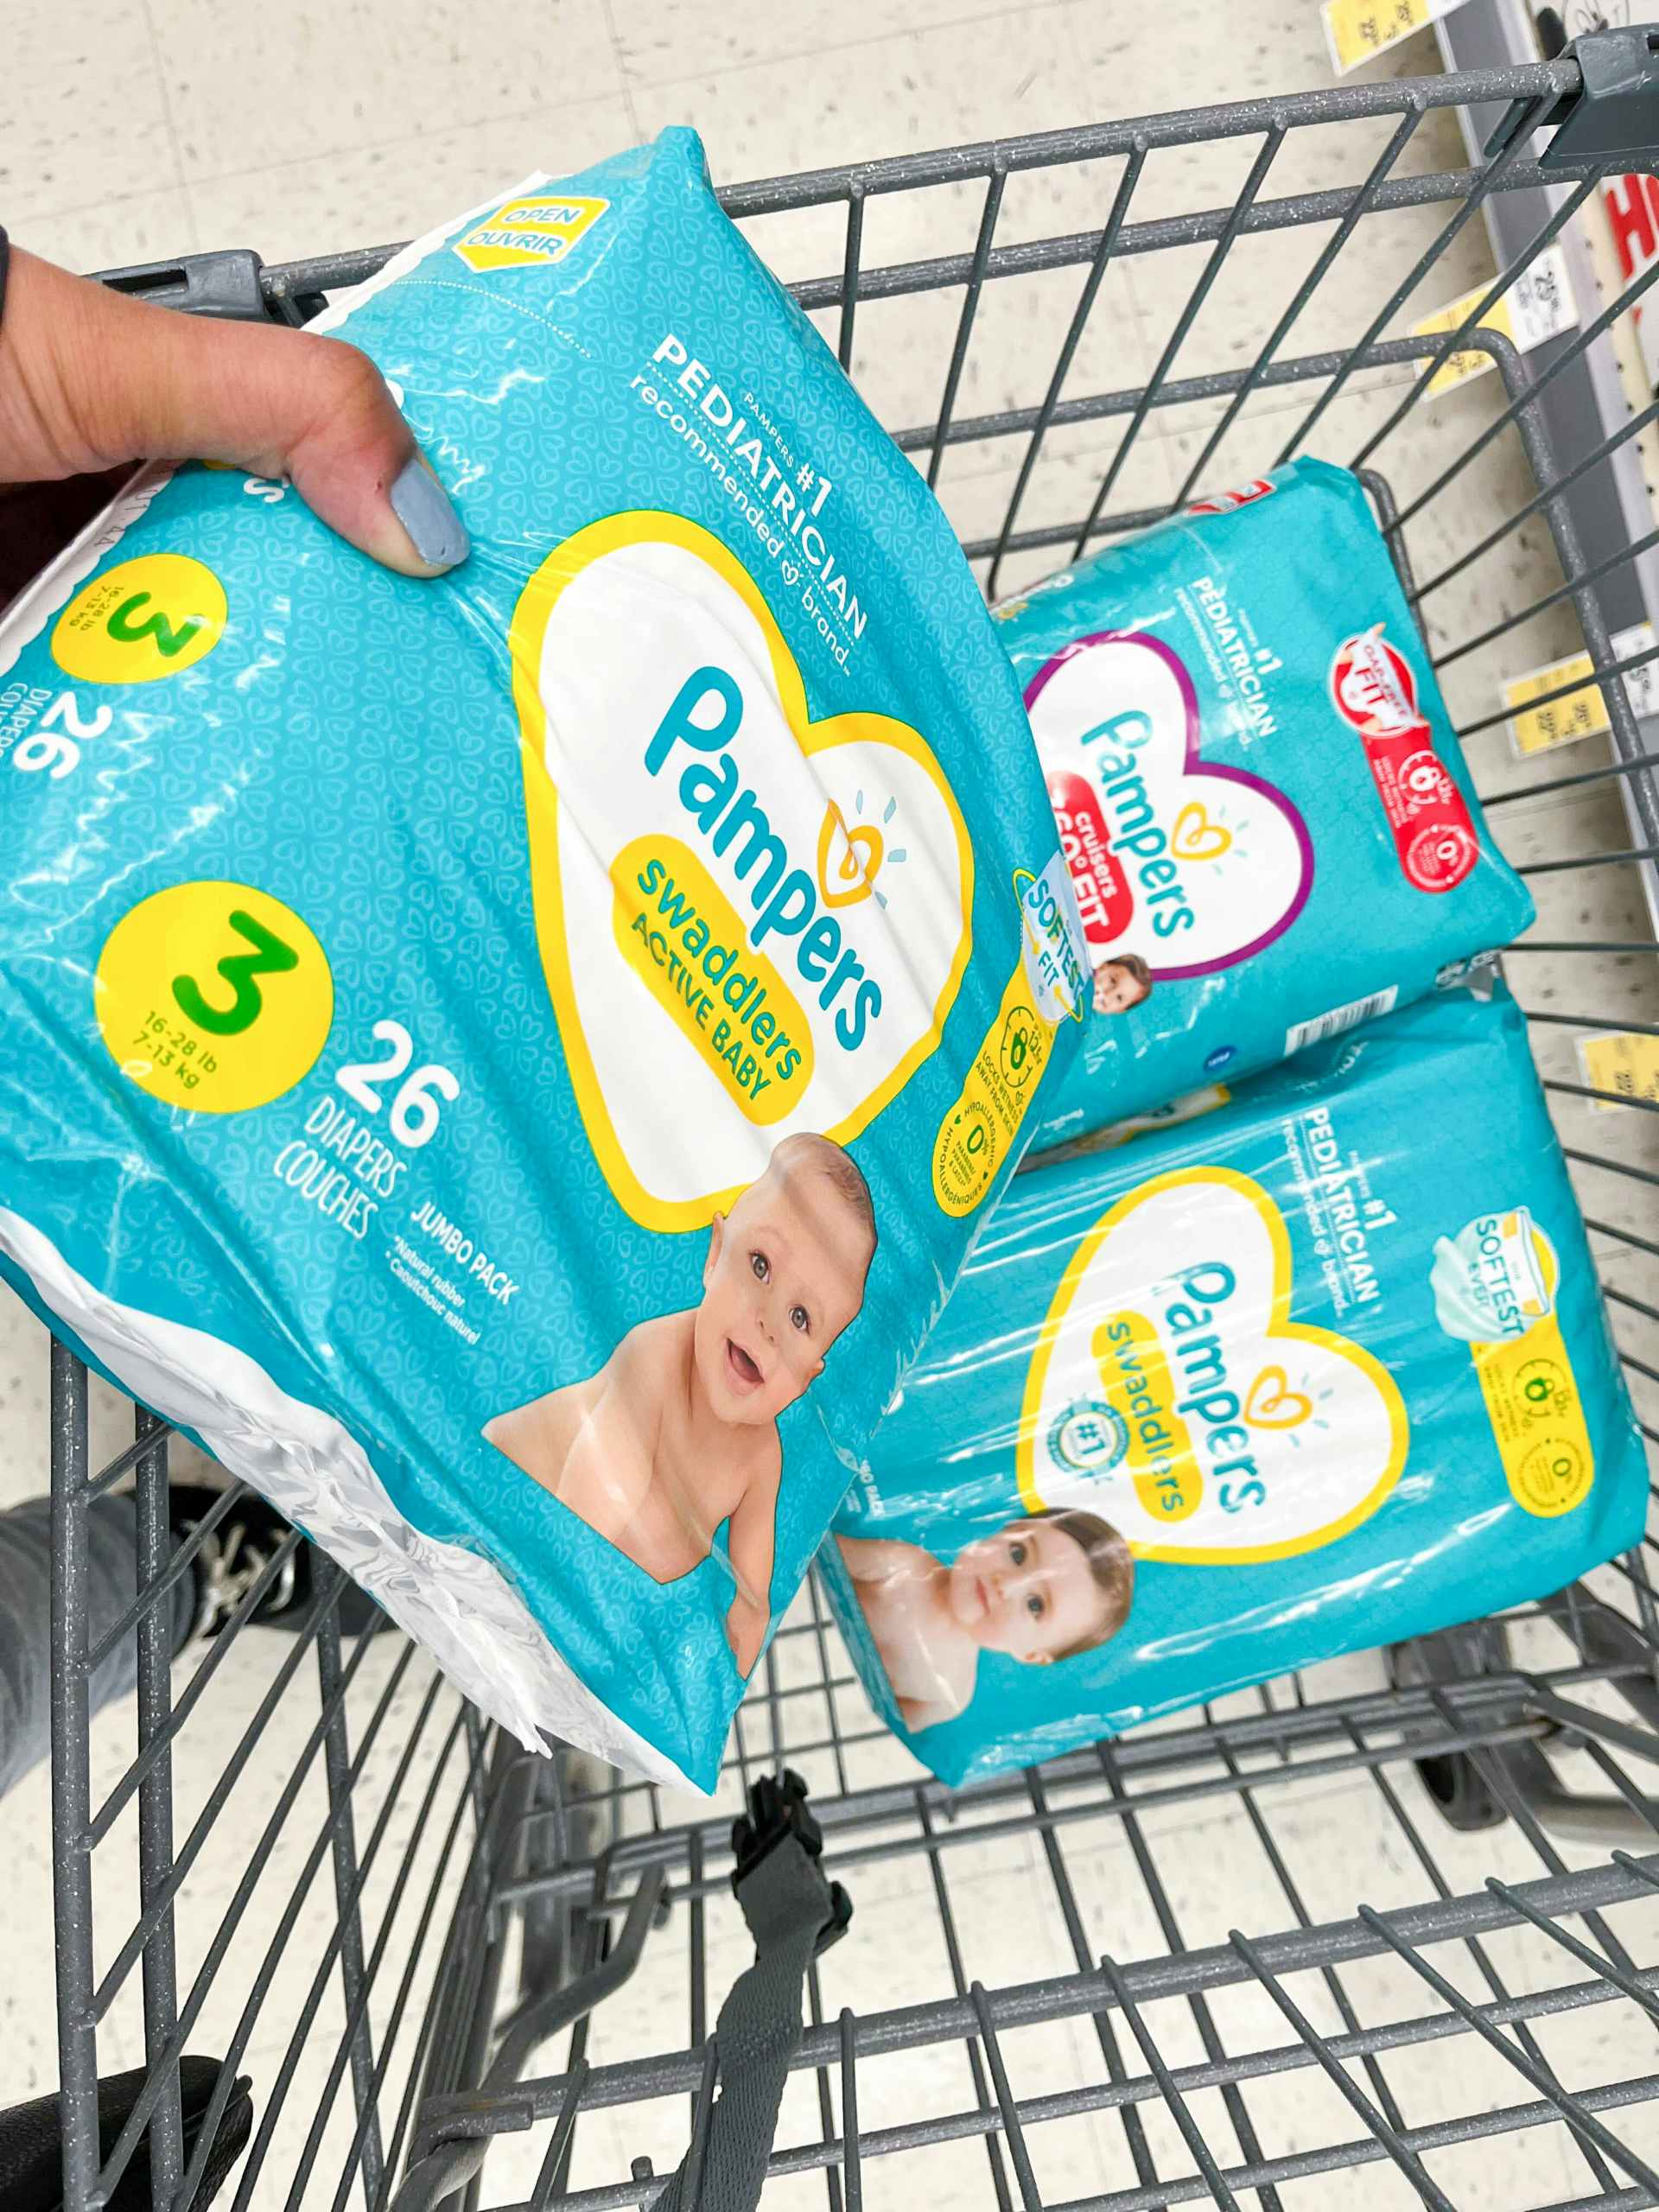 A person putting a pack of Pameprs diapers in a grocery cart with other diapers in it.